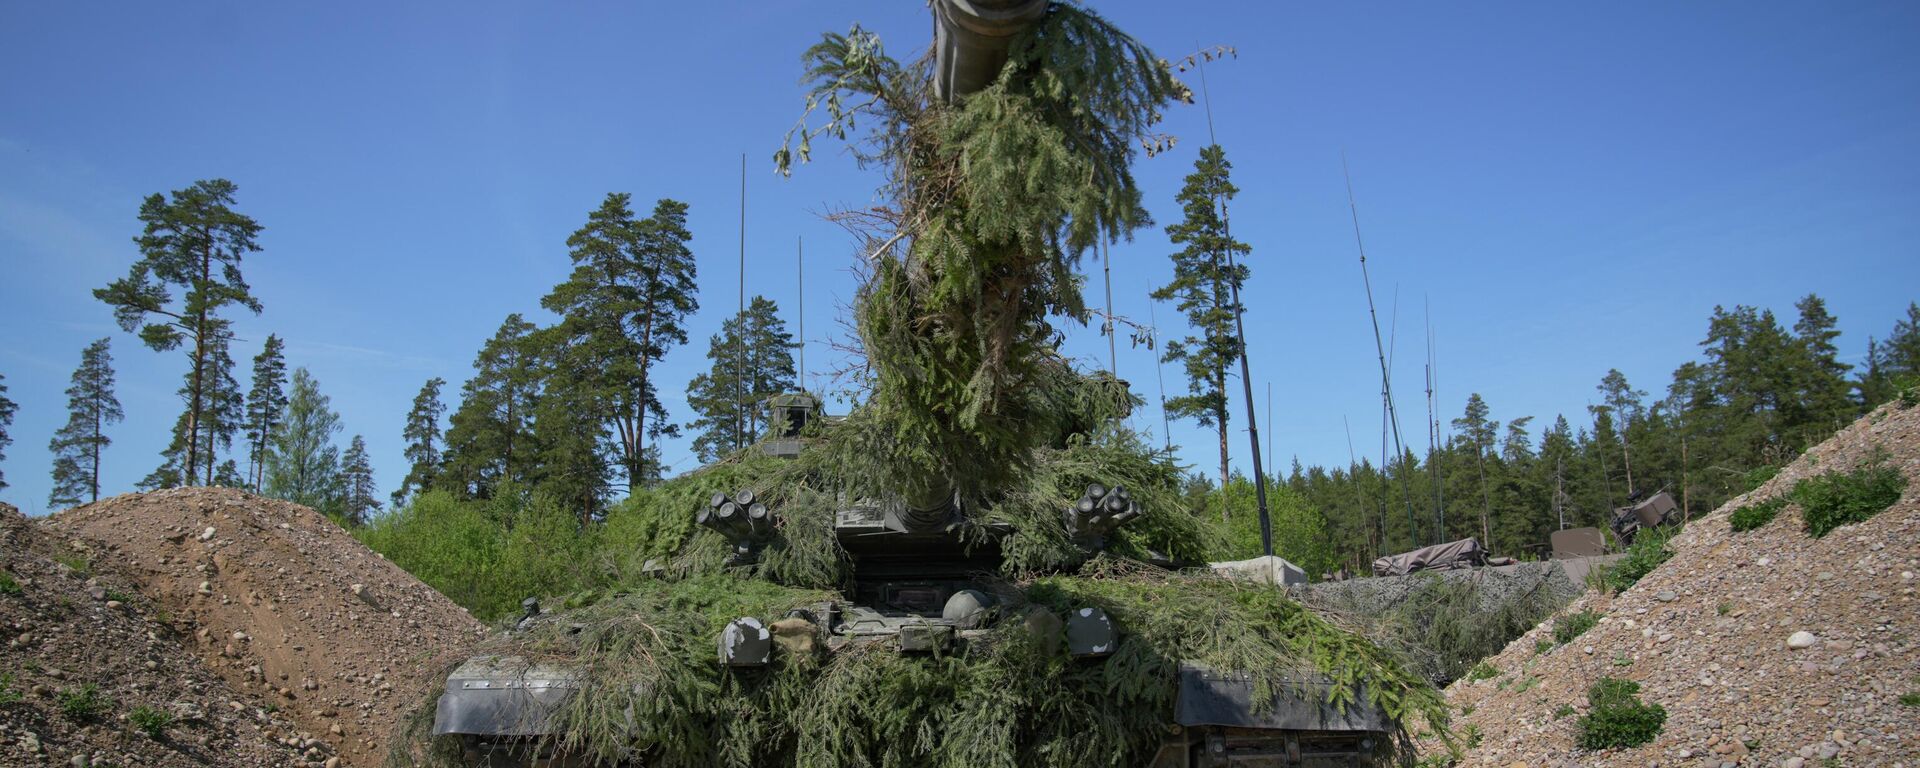 A Challenger 2 tank, this one belonging to the British army, seen during NATO drills in Estonia, May 2023. - Sputnik International, 1920, 07.09.2023